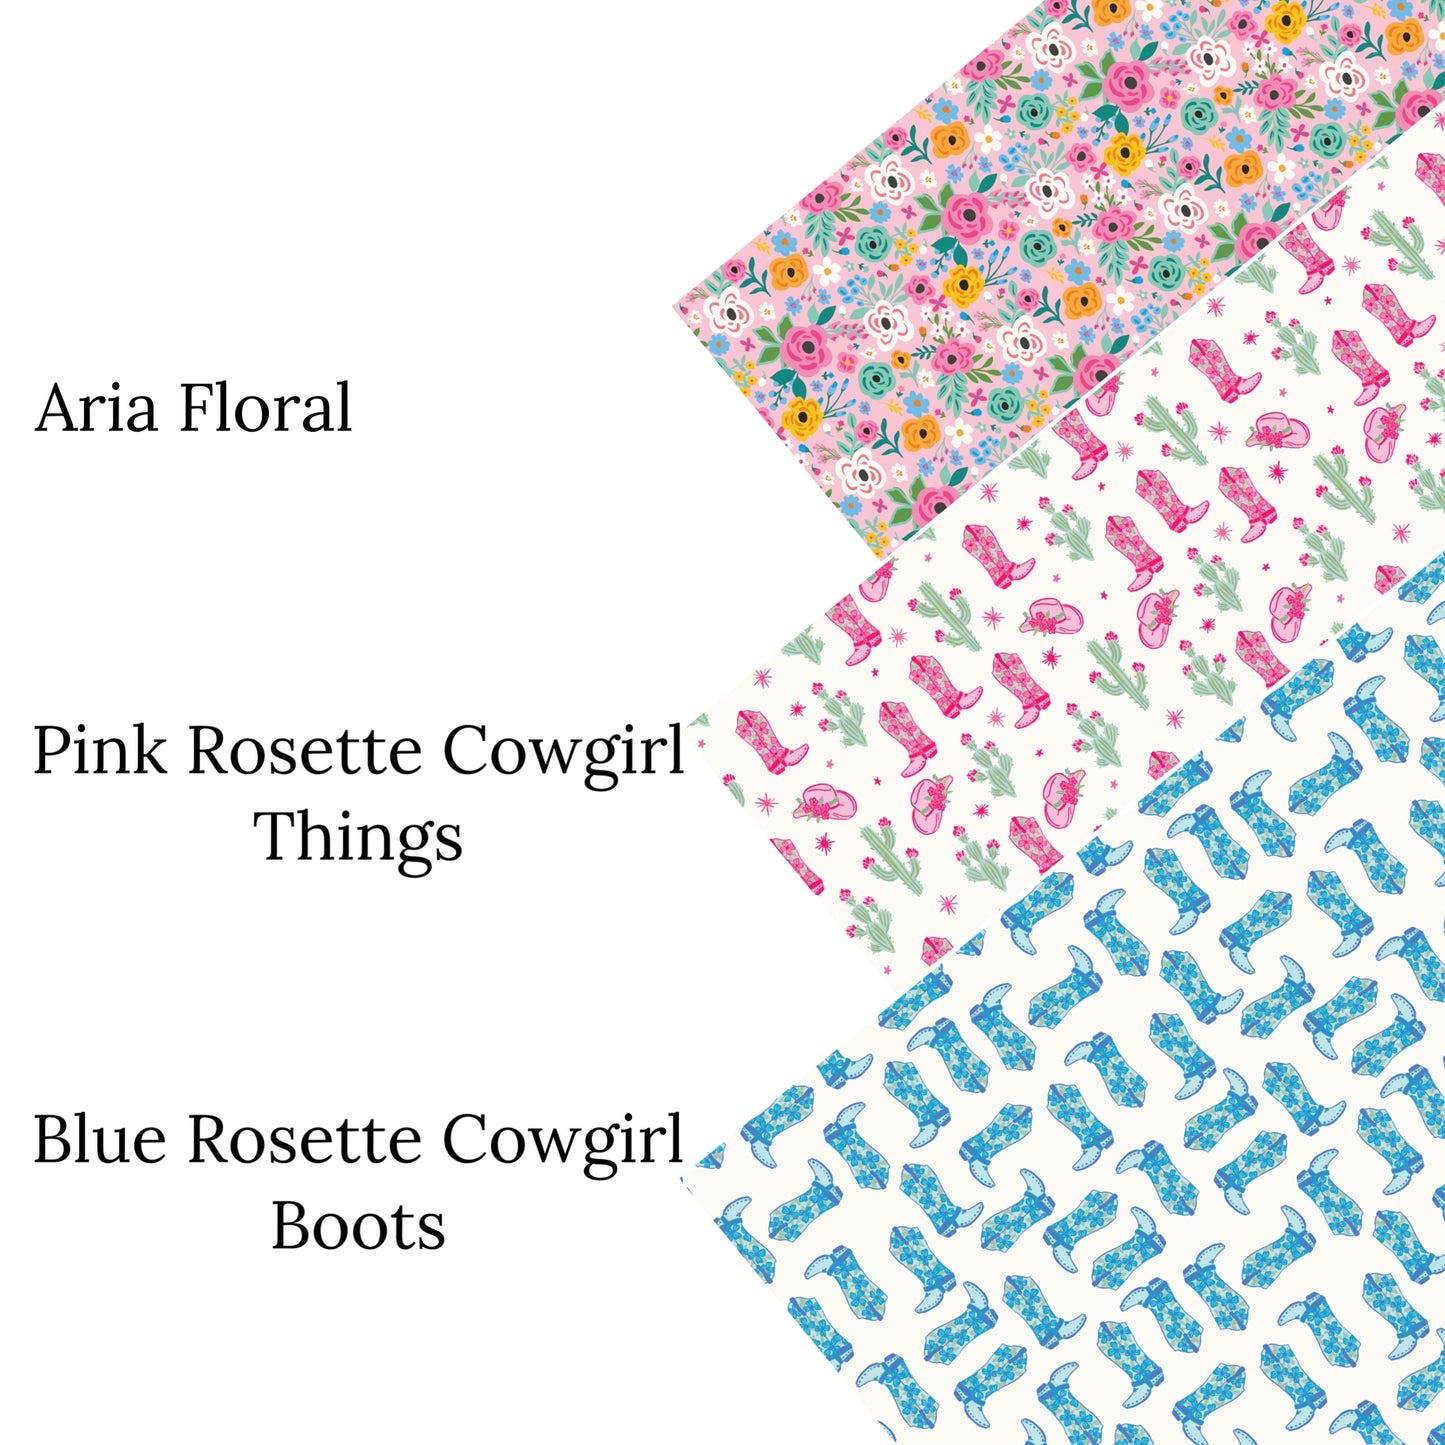 Blue Rosette Cowgirl Boots Faux Leather Sheets